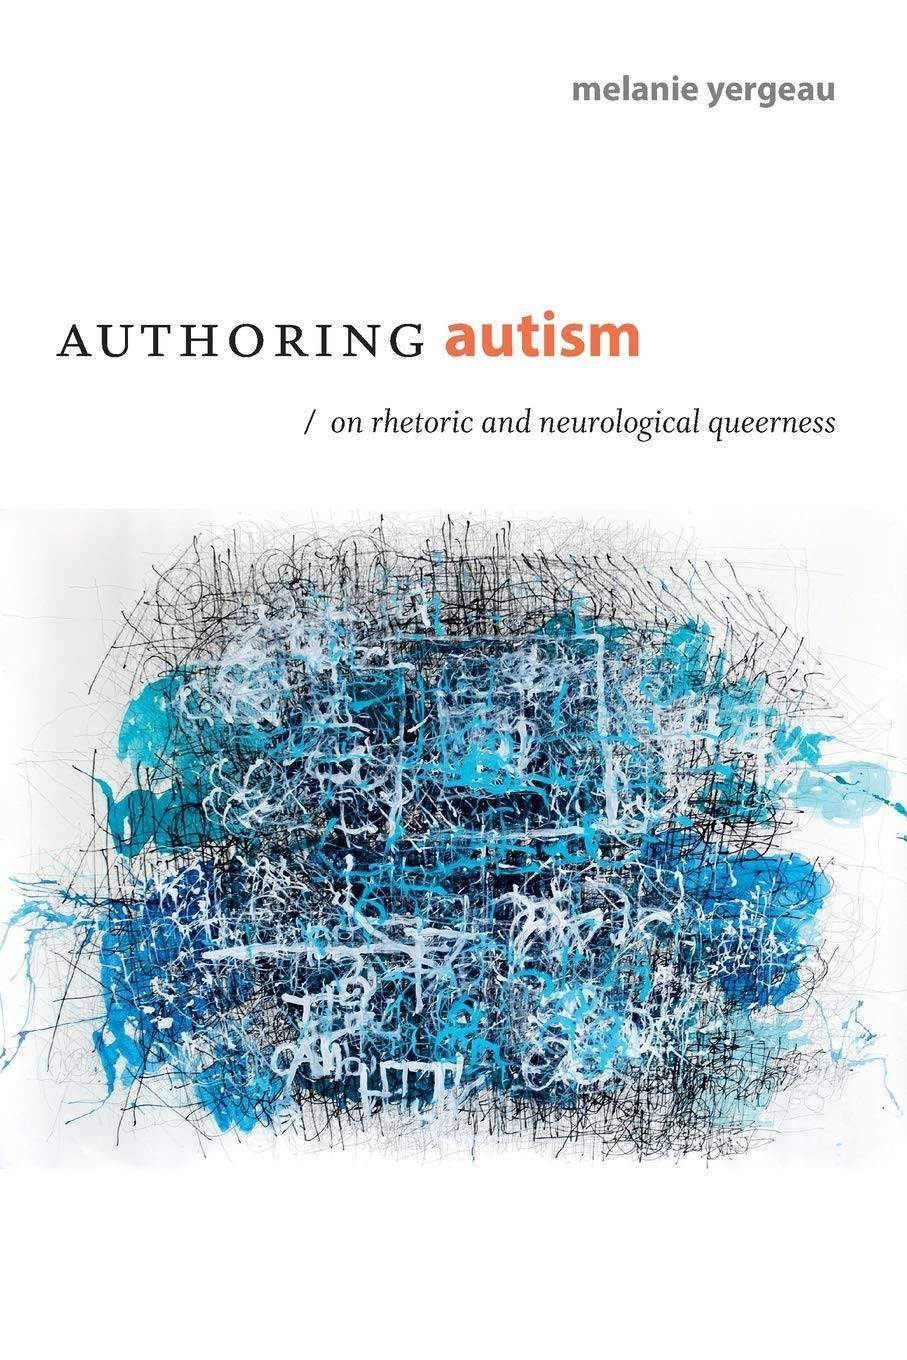 "Authoring Autism" book cover featuring an abstract design of blue and black lines.